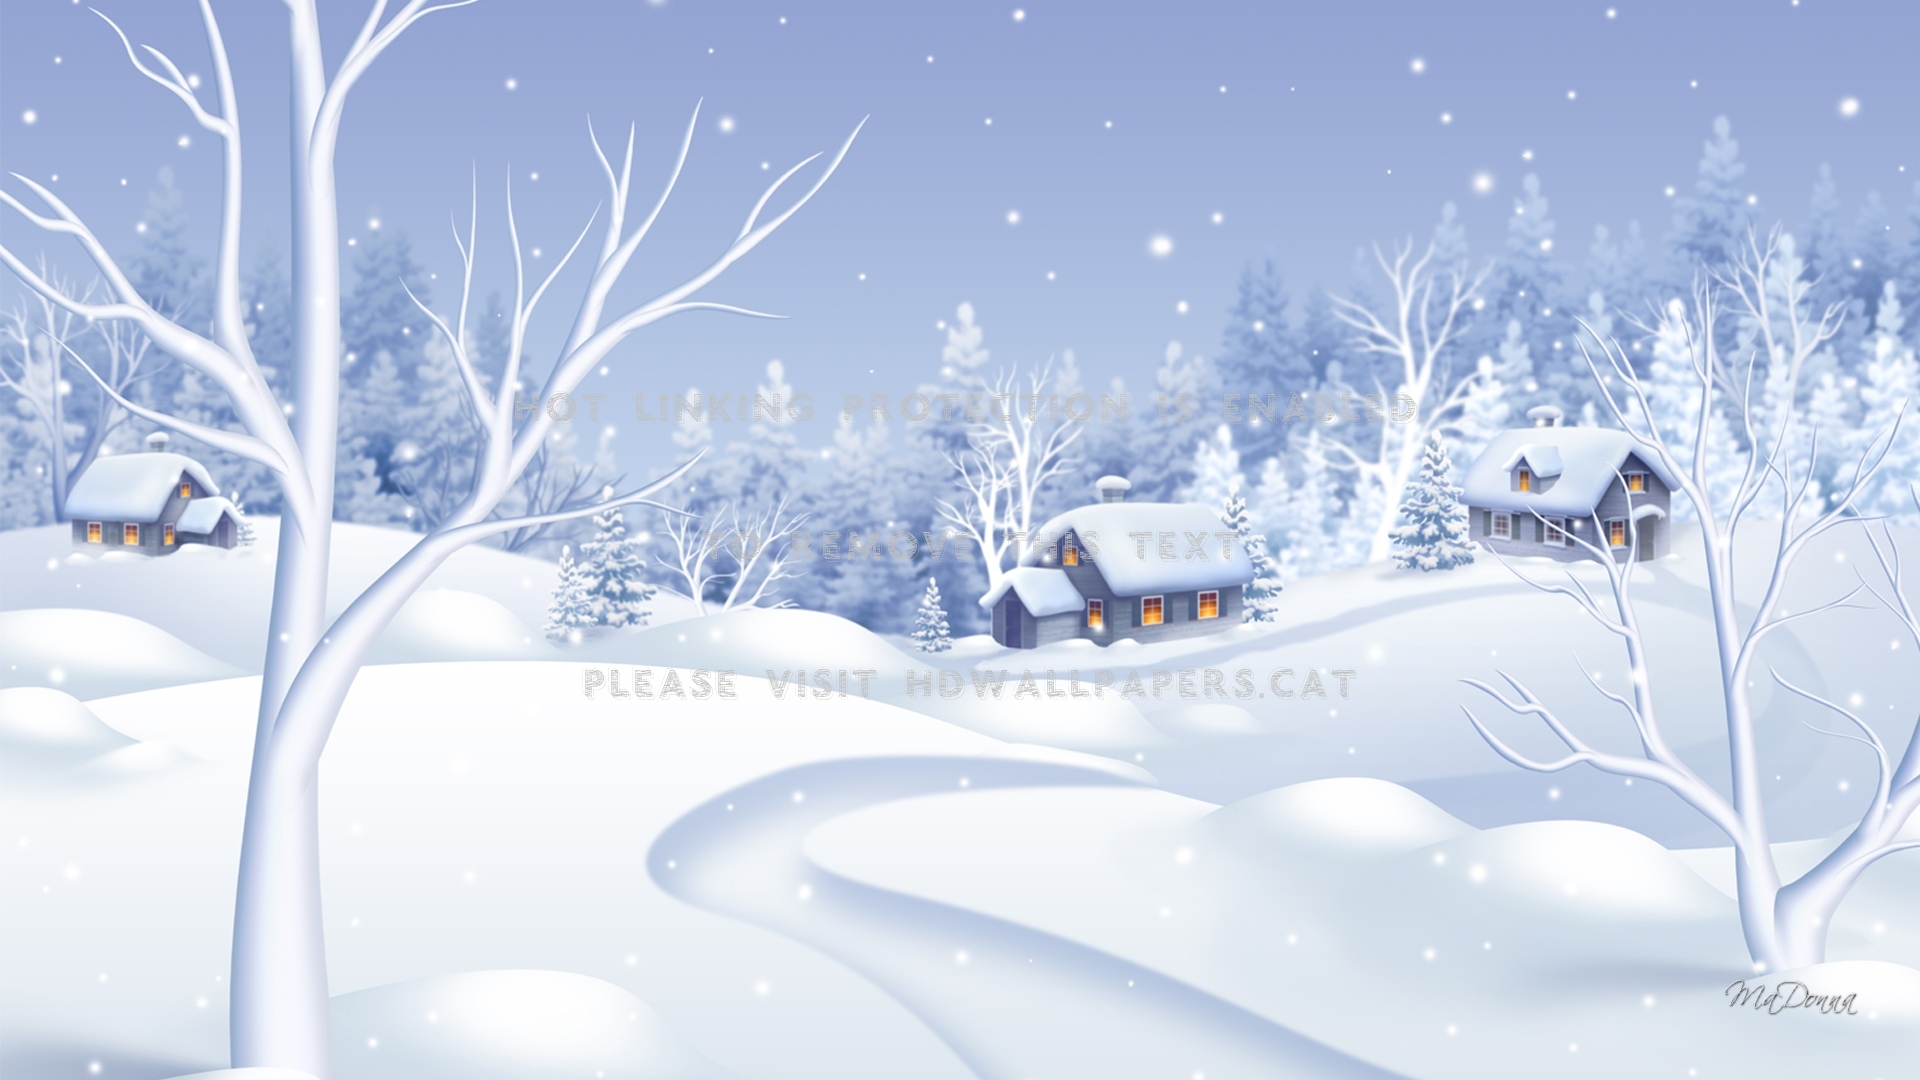 Cozy Winter Cottages Comfy Lane Trees Snow - Winter Screensavers Snowing - HD Wallpaper 